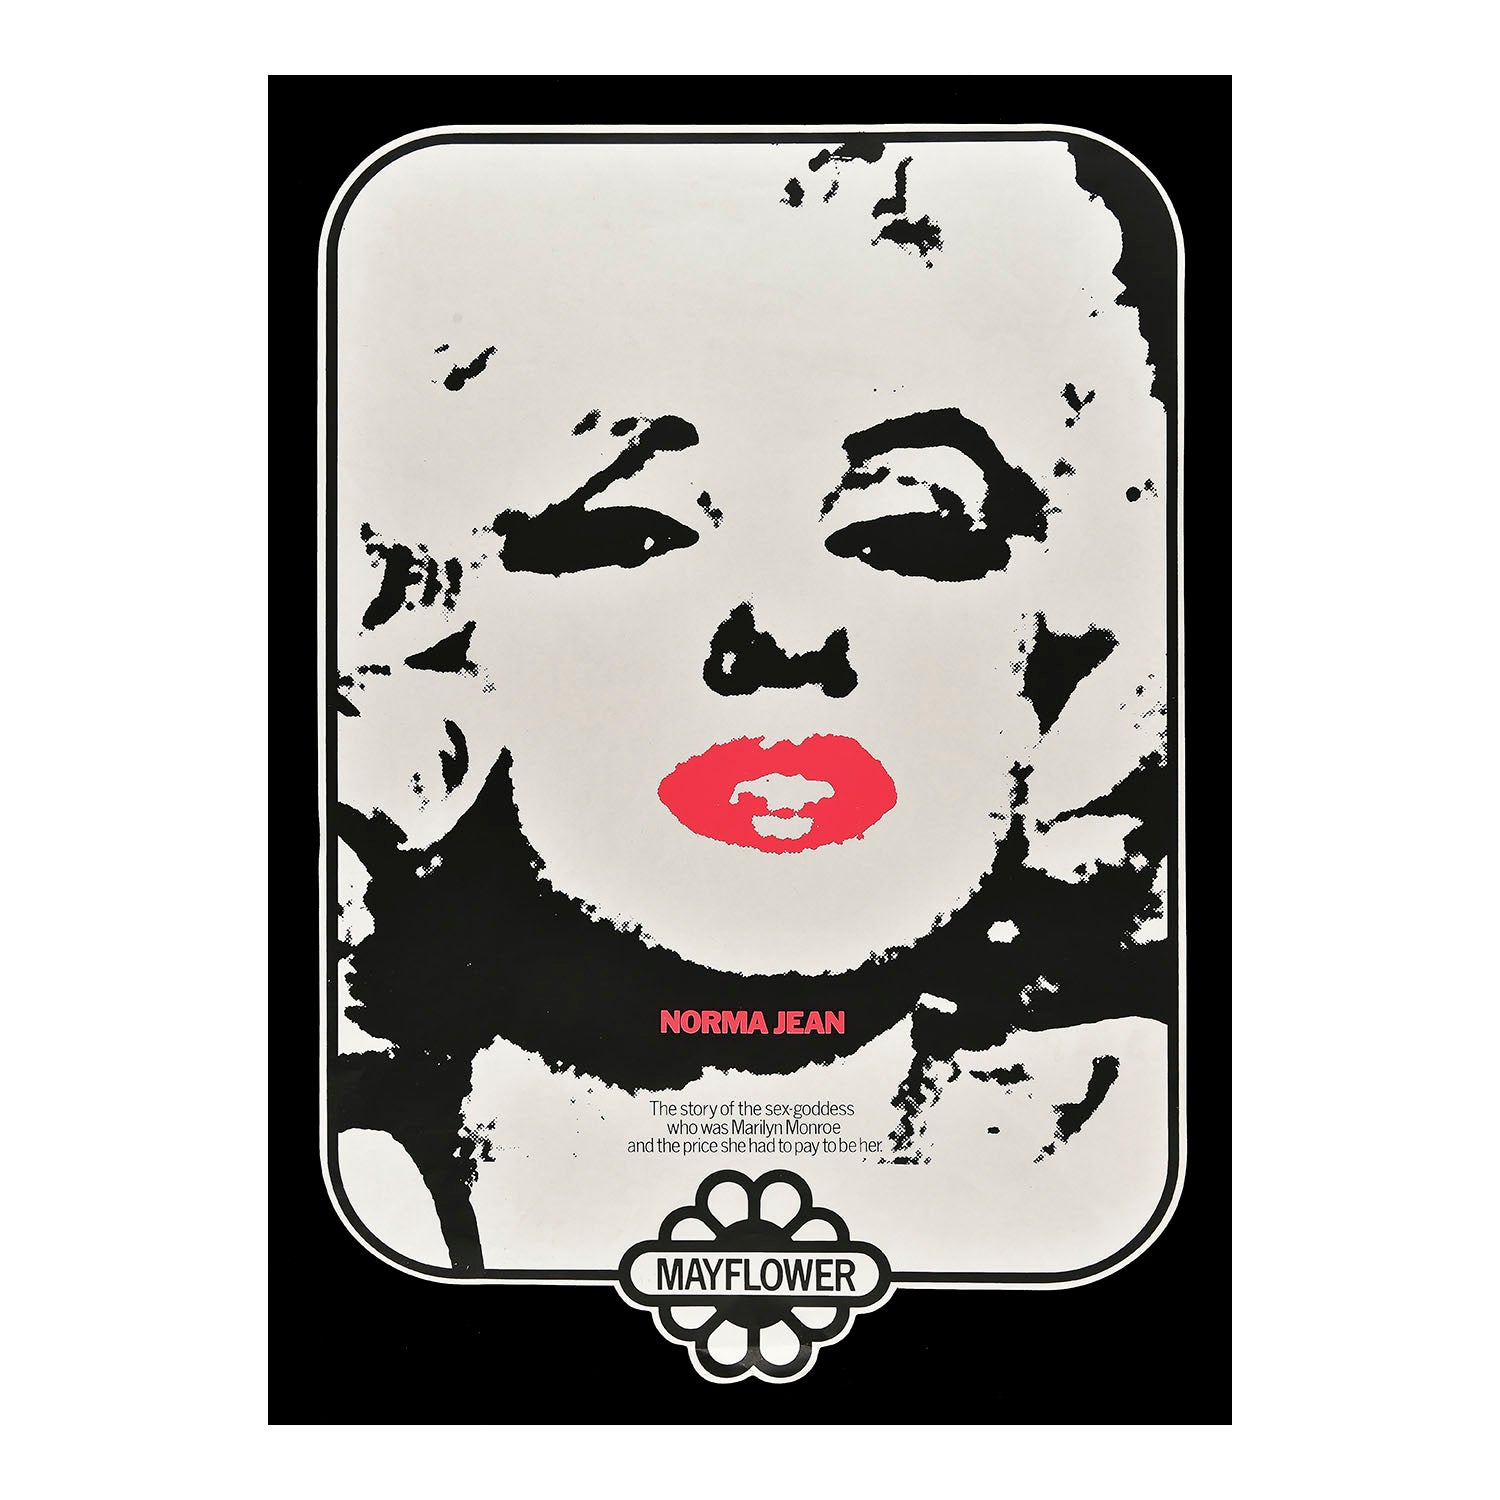 original, in-store promotional poster for Norma Jean: the life of Marilyn Monroe, by Fred Lawrence Guiles, 1969. The poster, photographed here against a black background, shows Monroe within a curved frame and cut out decal of the publisher’s logo